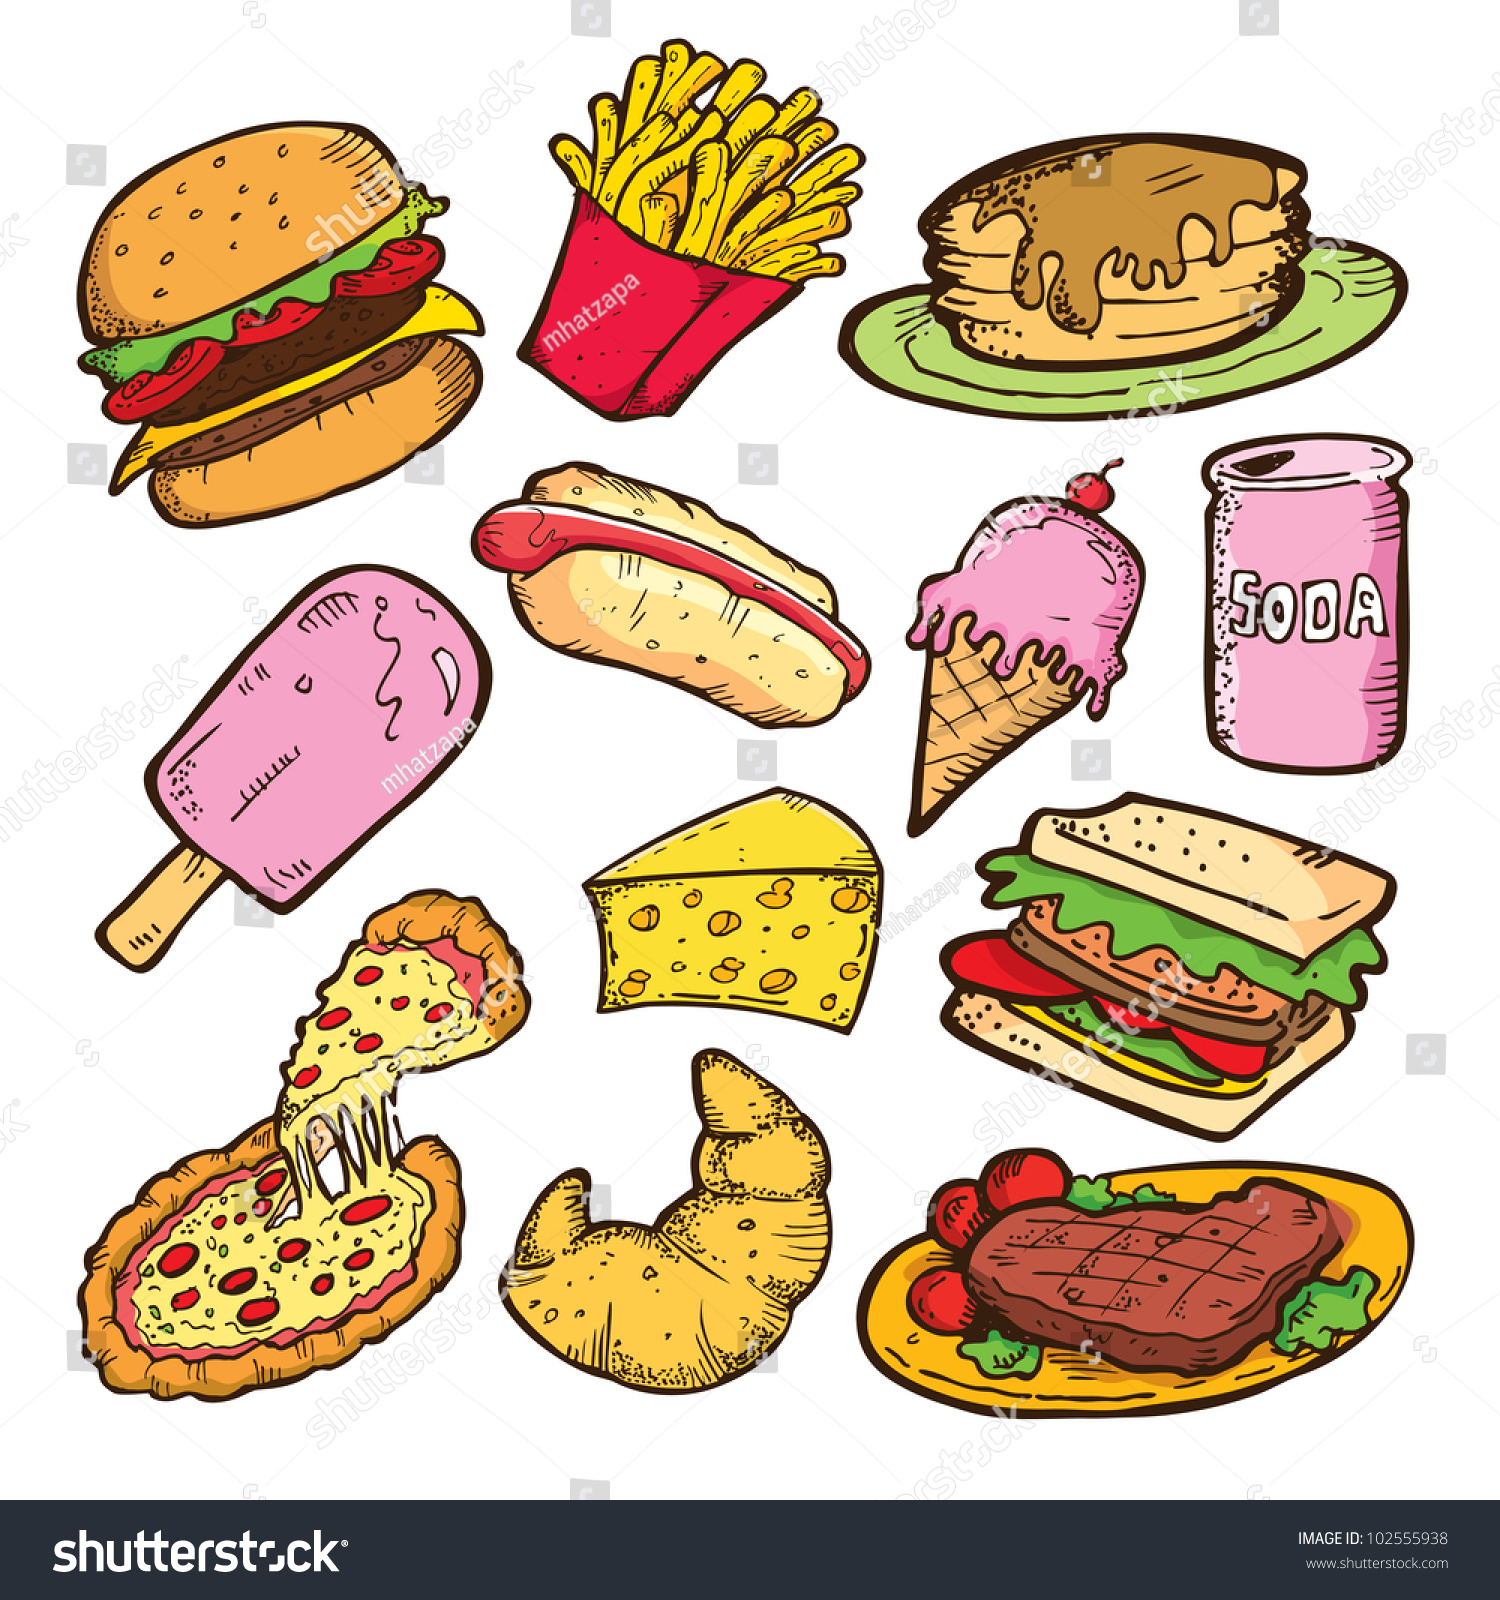 clipart pictures of junk food - photo #21